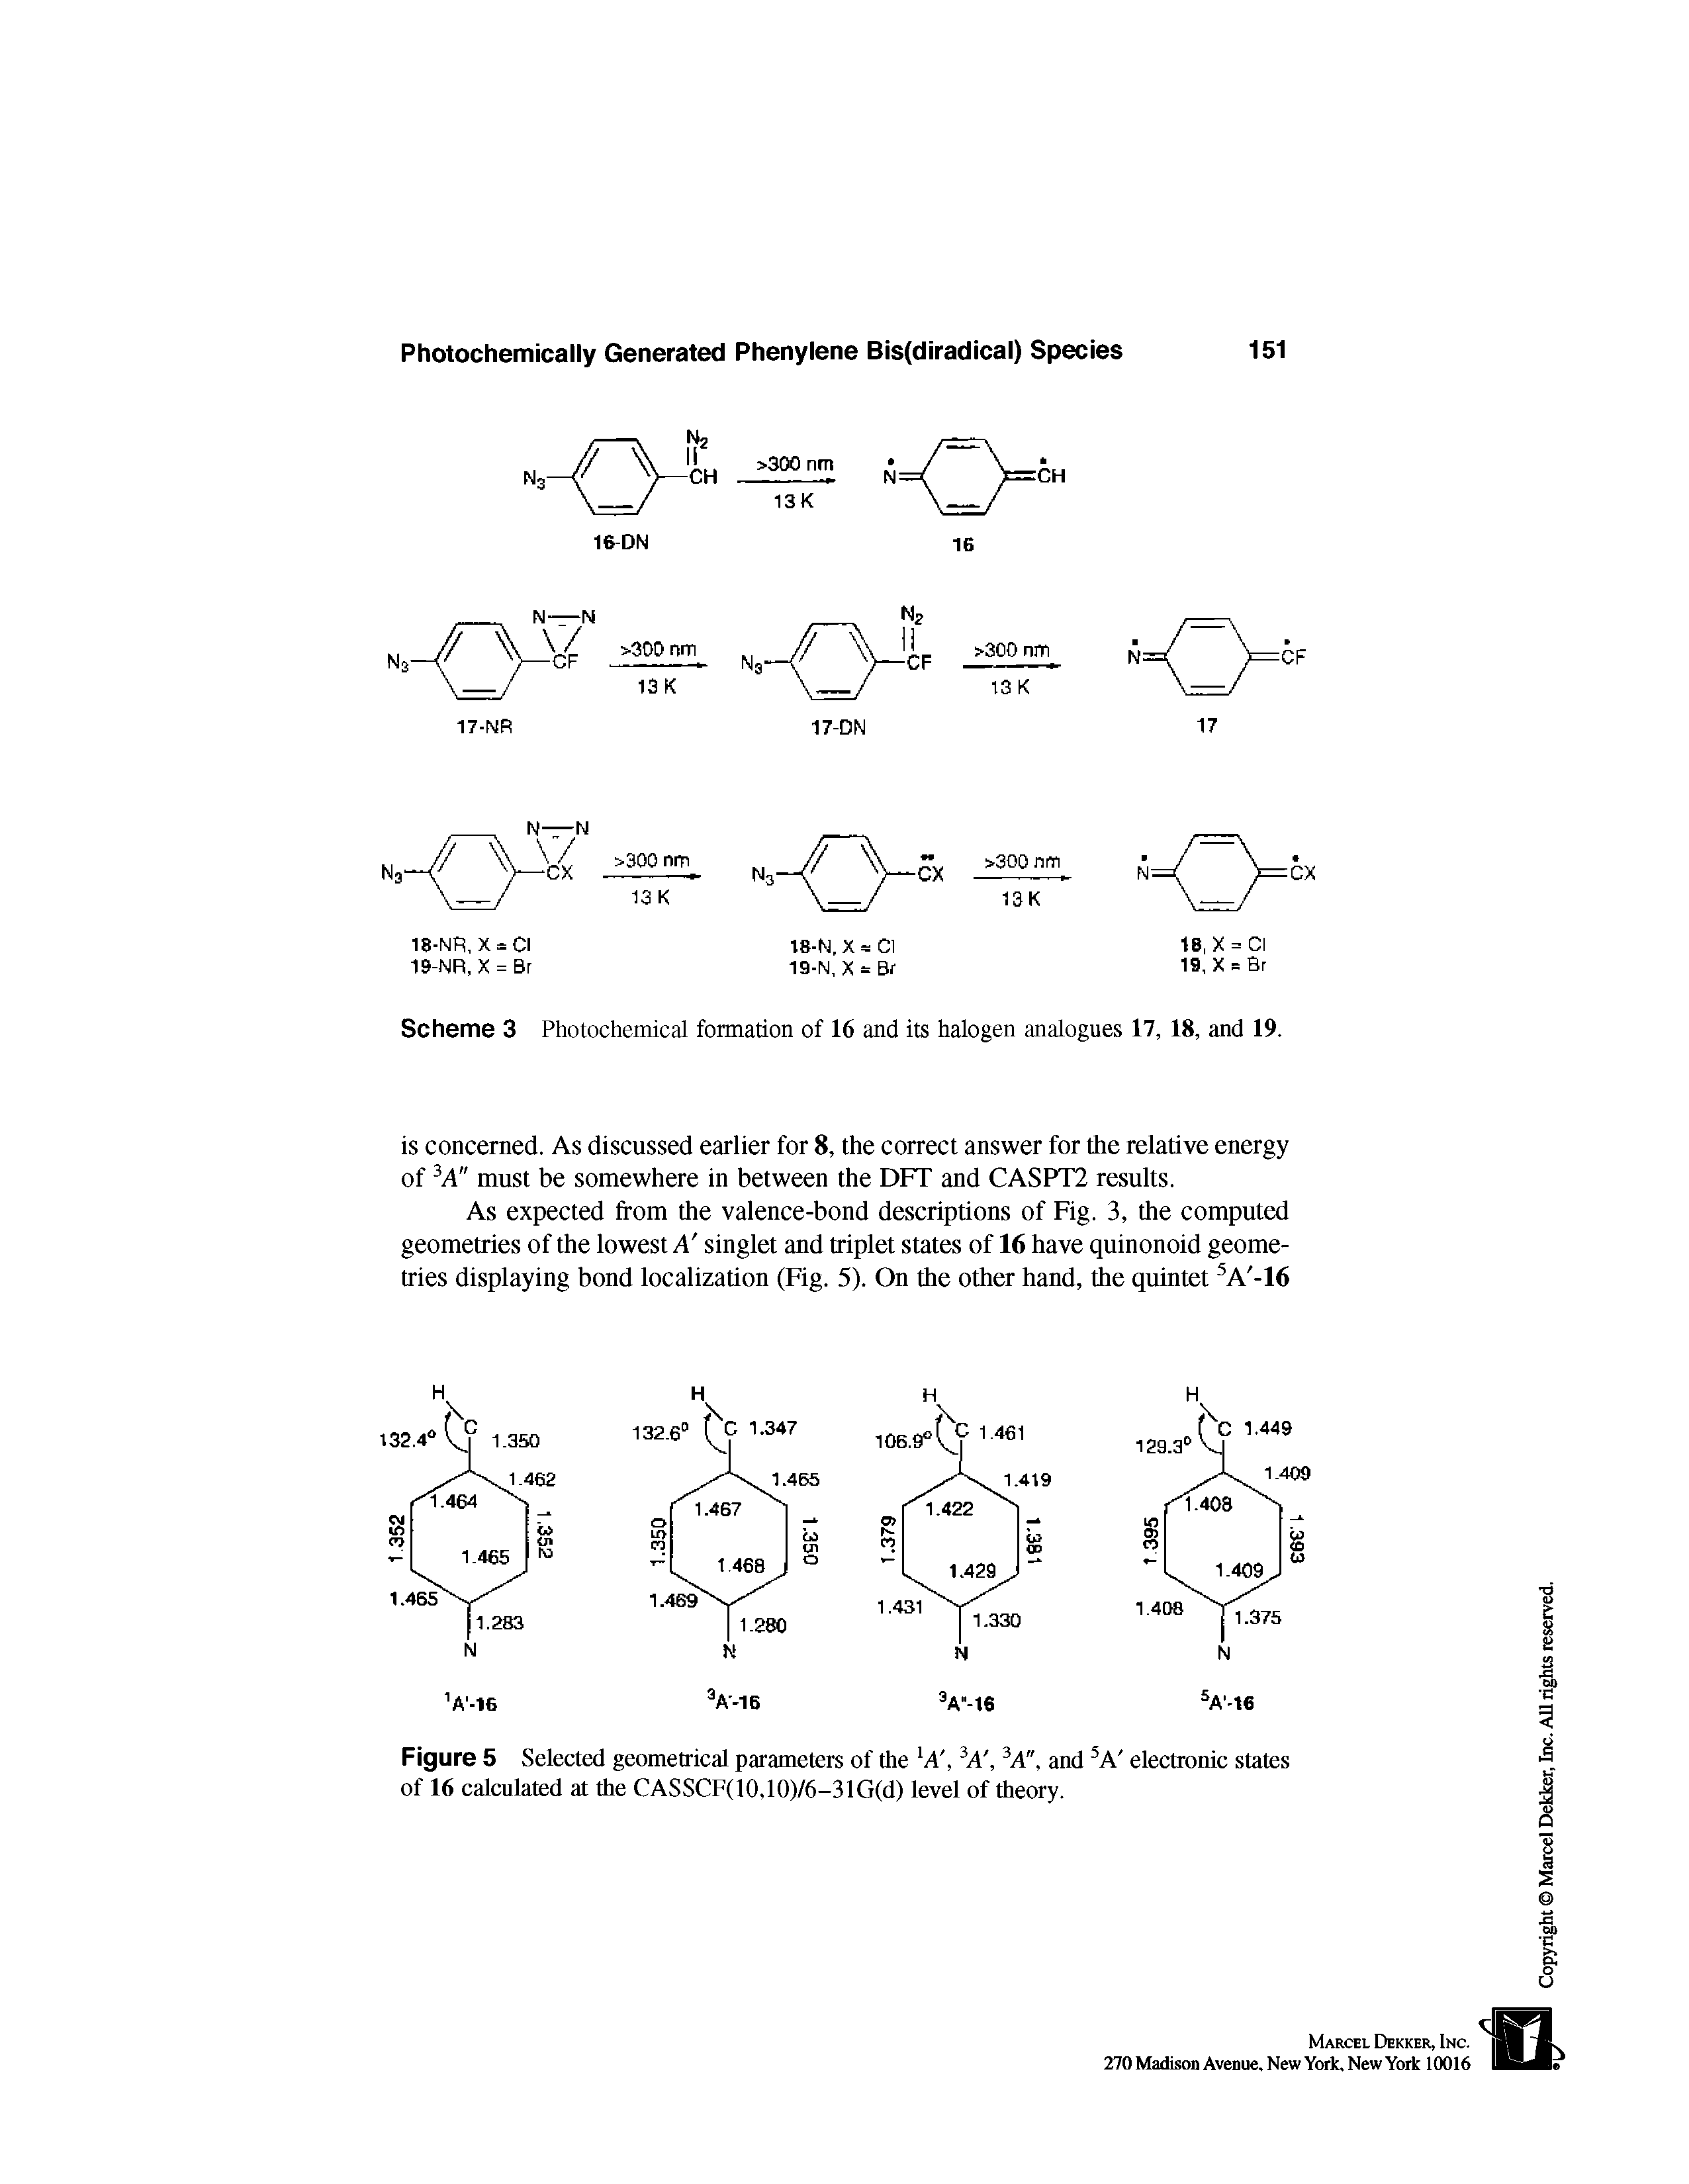 Figure 5 Selected geometrical parameters of the A, A, A", and A electronic states of 16 calculated at the CASSCF(10,10)/6-31G(d) level of theory.